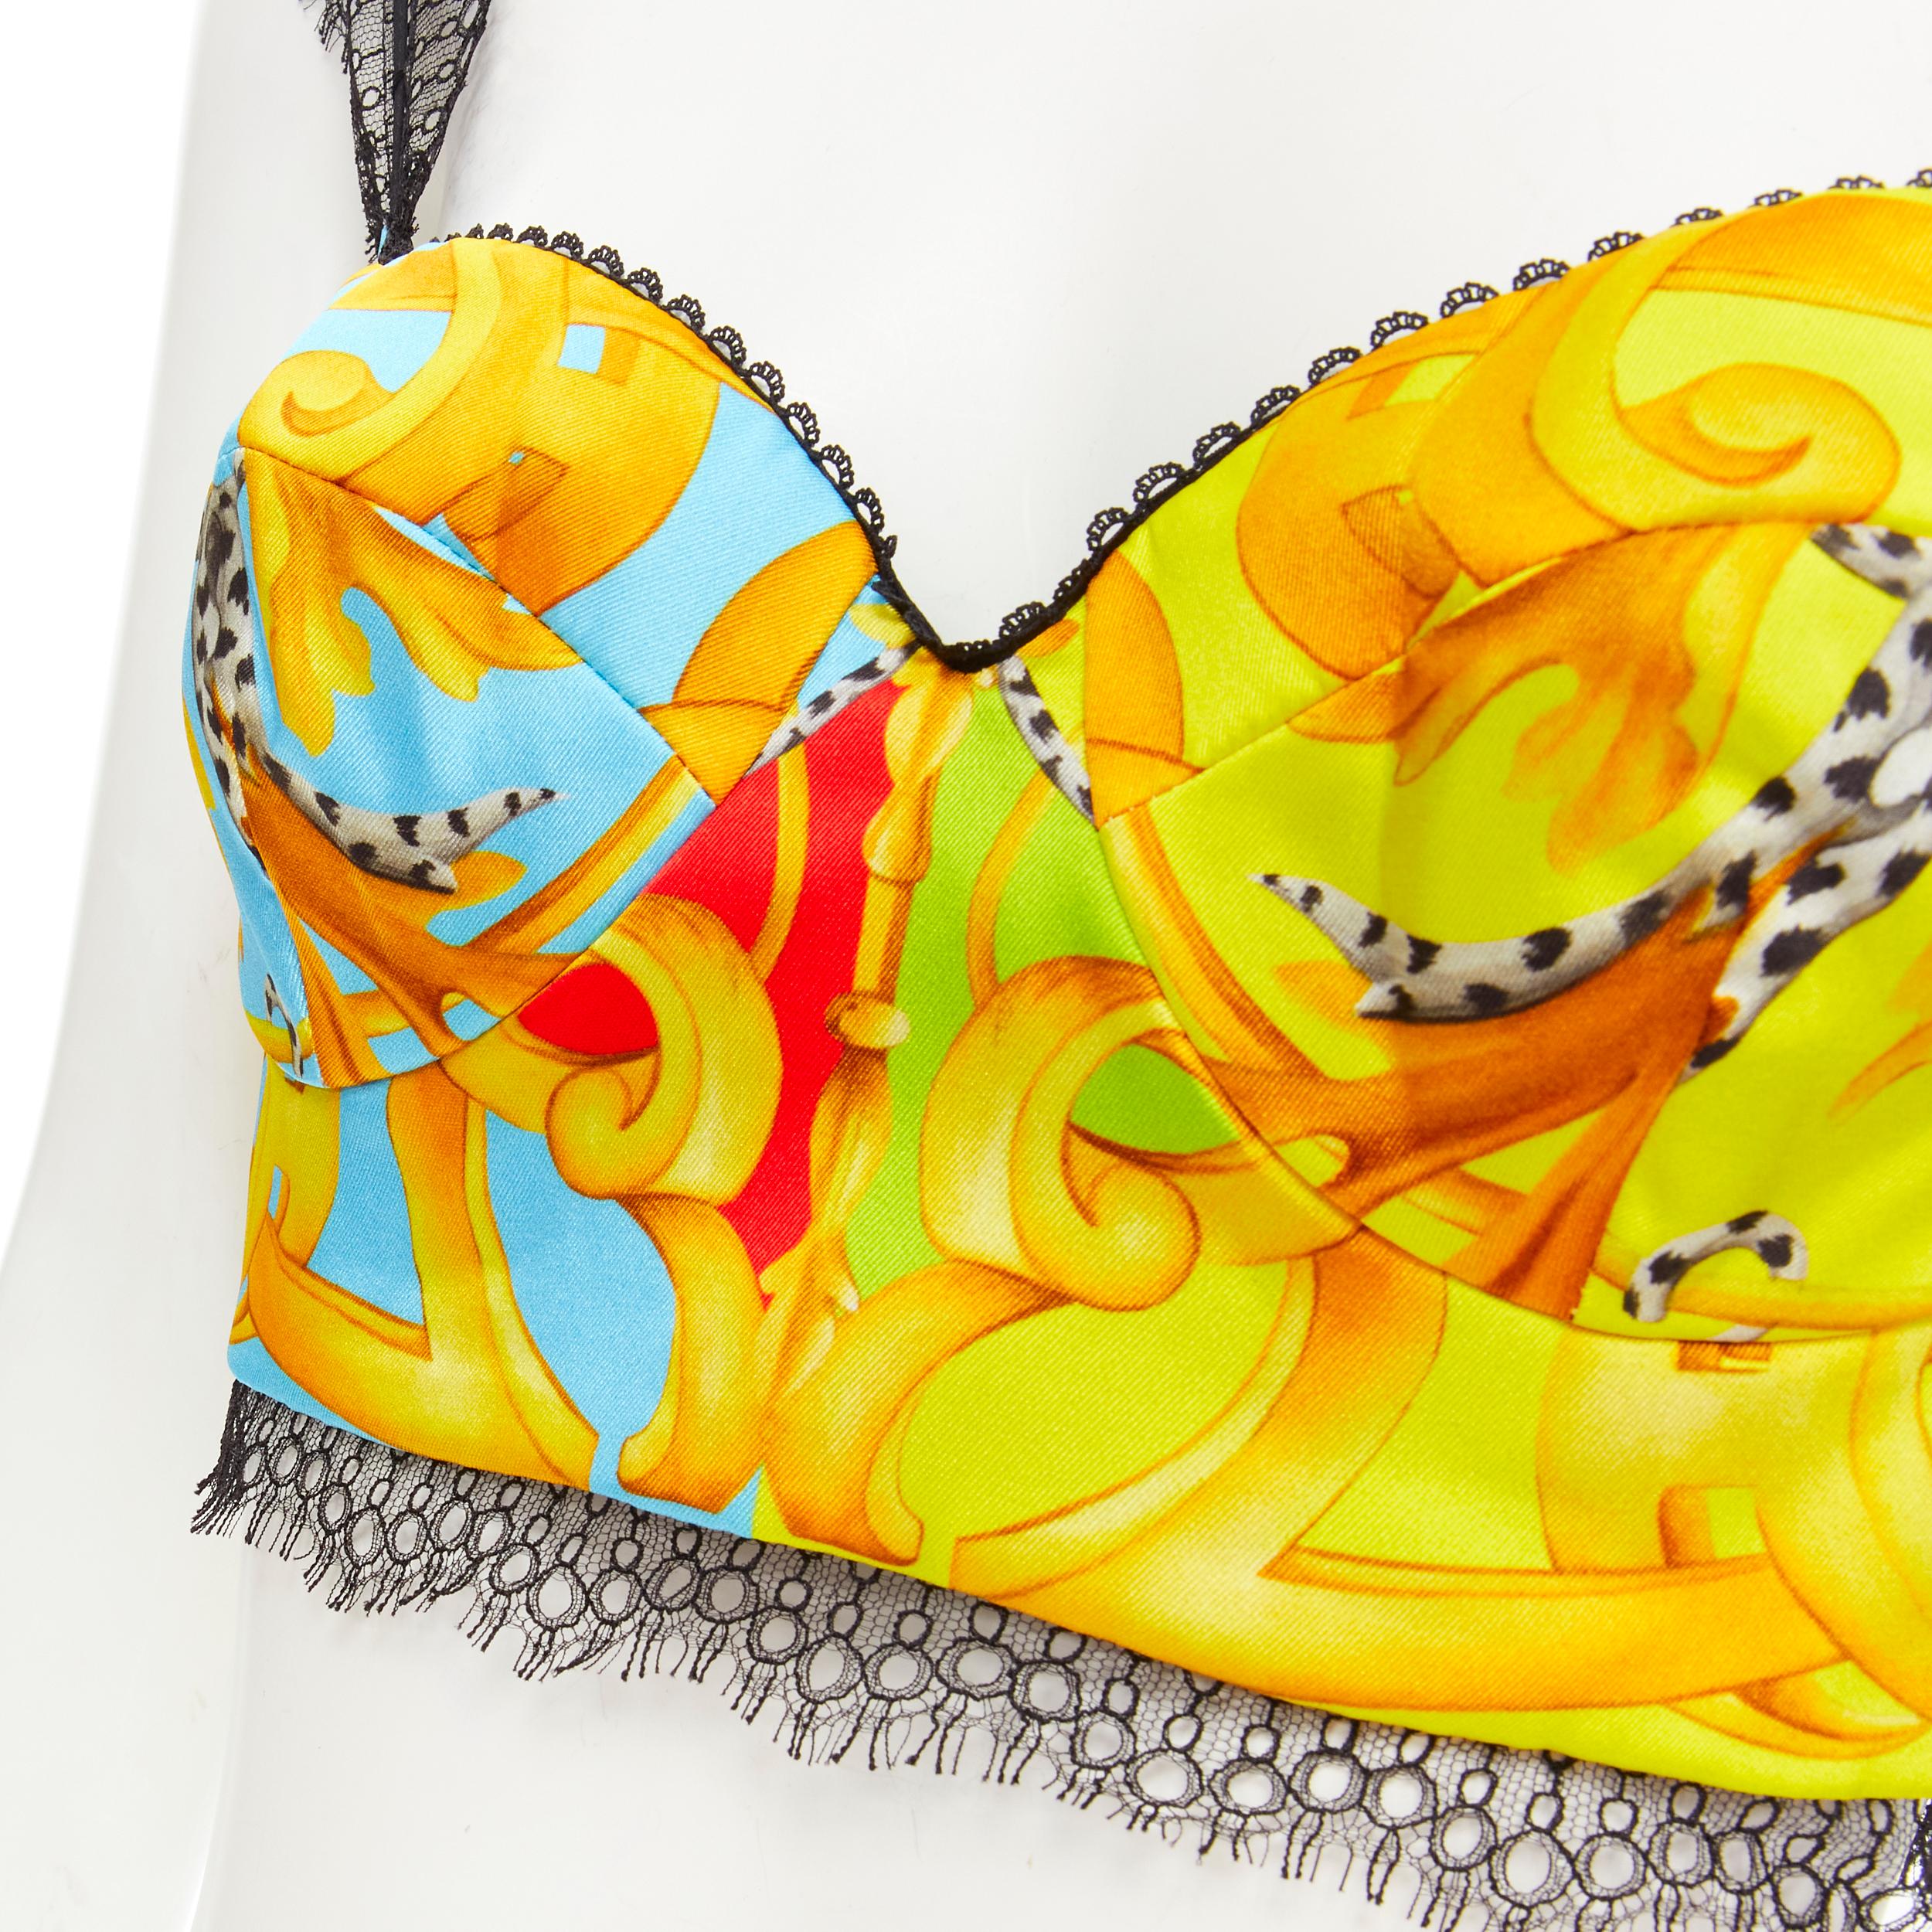 new VERSACE Barocco Acanthus Pop lace boned bustier bralette crop top S IT40
Brand: Versace
Collection: Pop Acanthus Barocco 
Extra Detail: Signature Versace boned bustier bralette continuously renewed in new prints every season. Sweetheart neckline